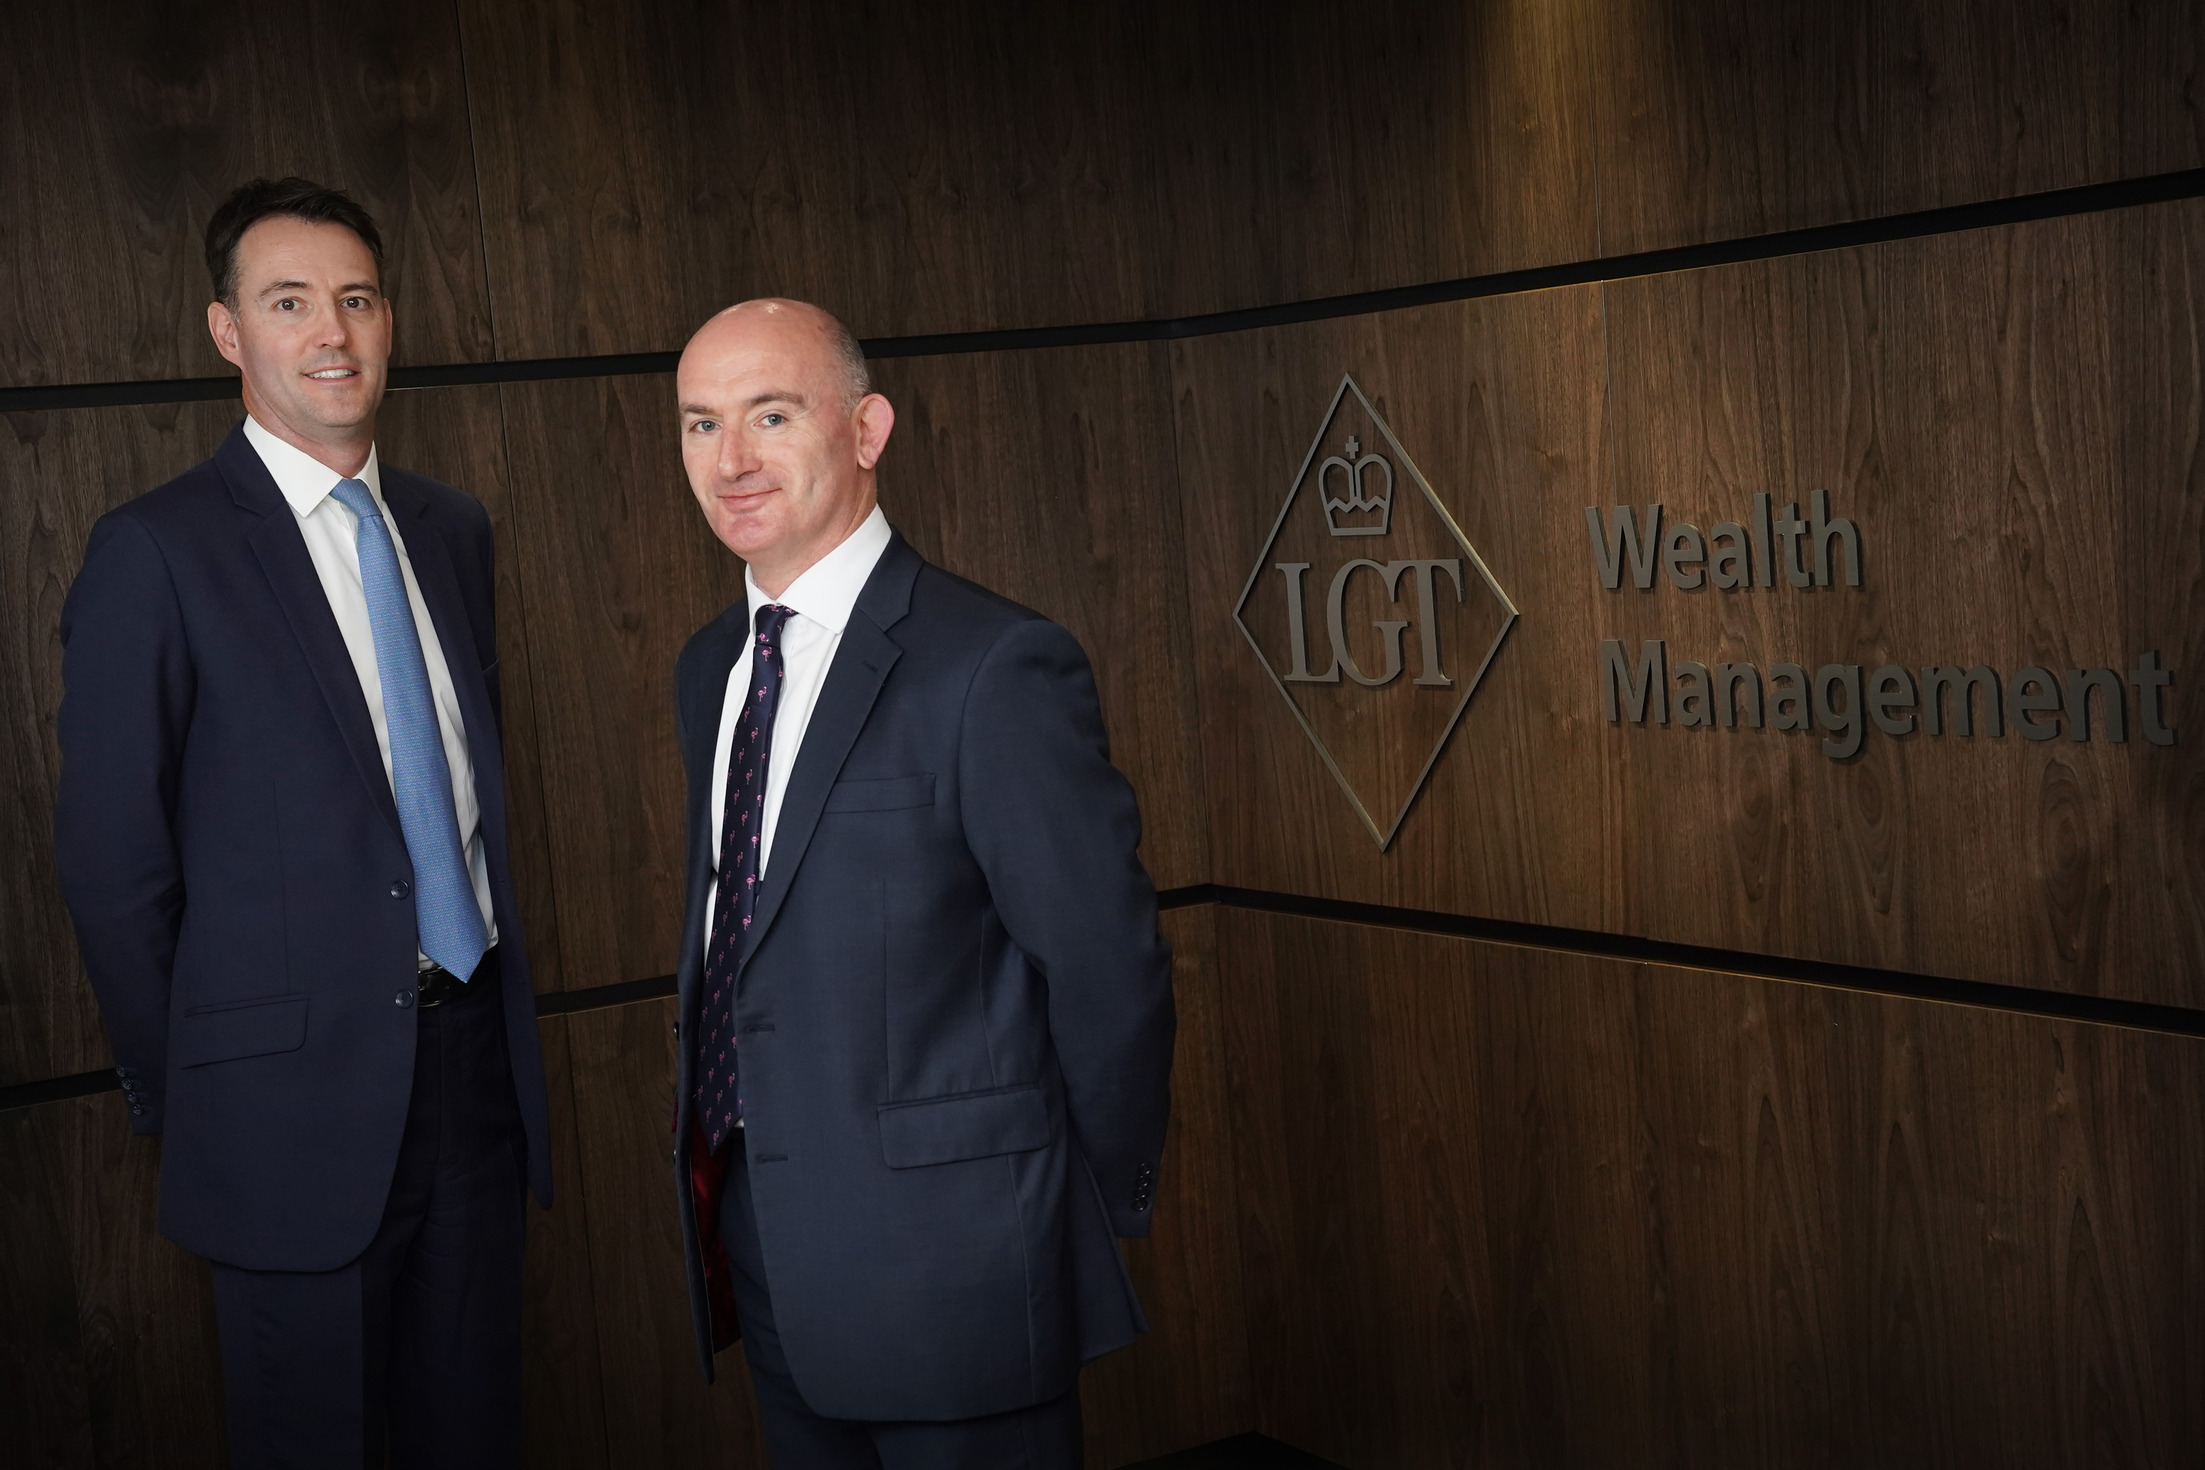 LGT WM moves Scottish HQ and hires director from Barclays Wealth